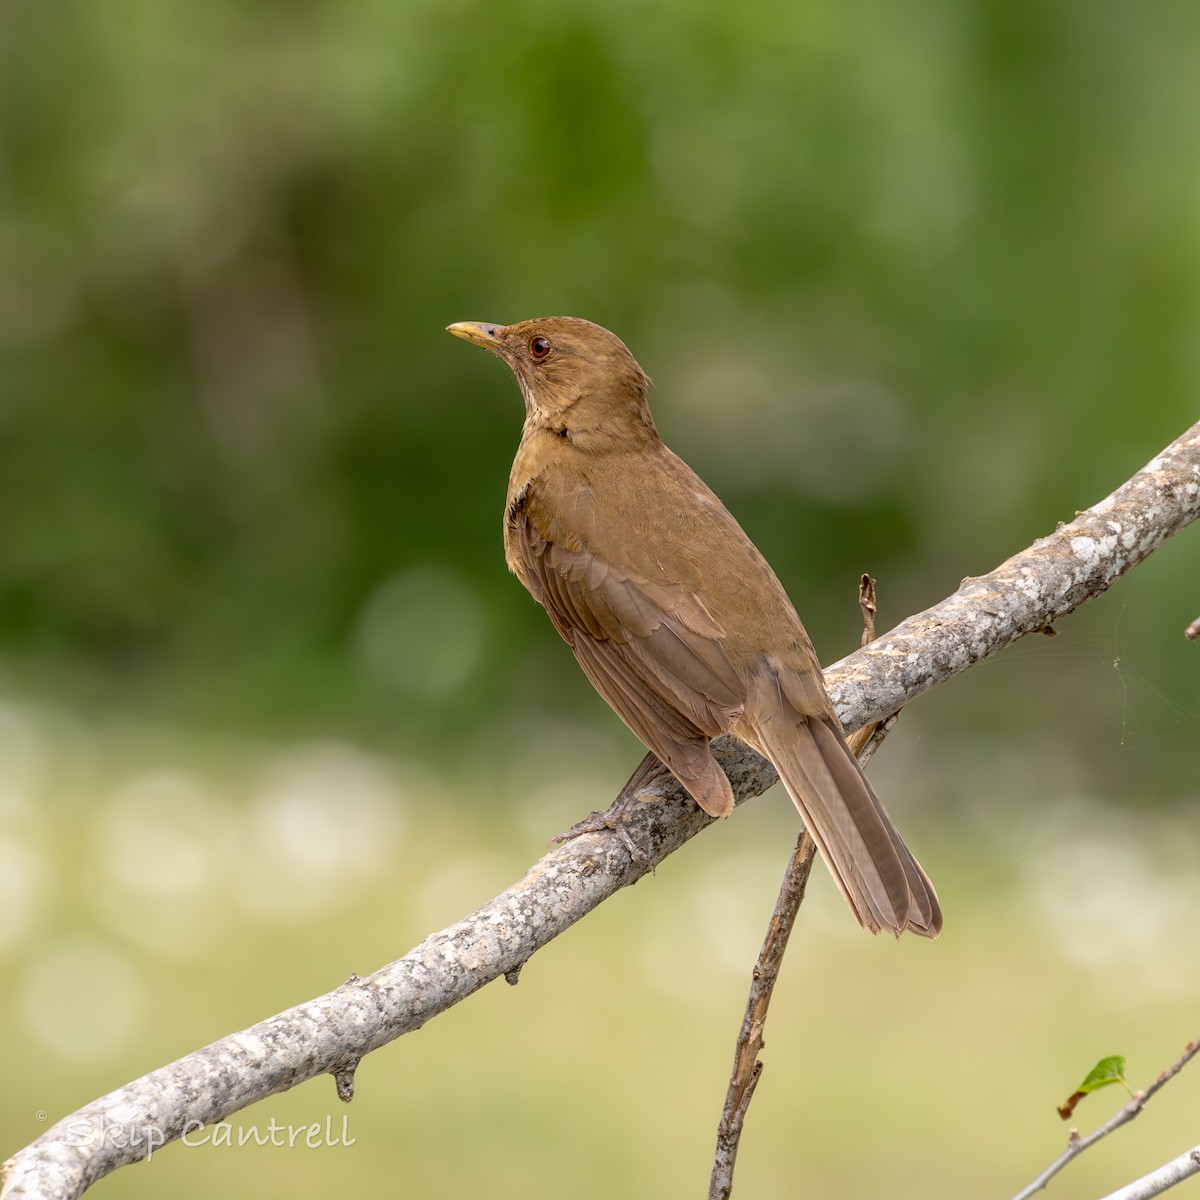 Clay-colored Thrush - Skip Cantrell